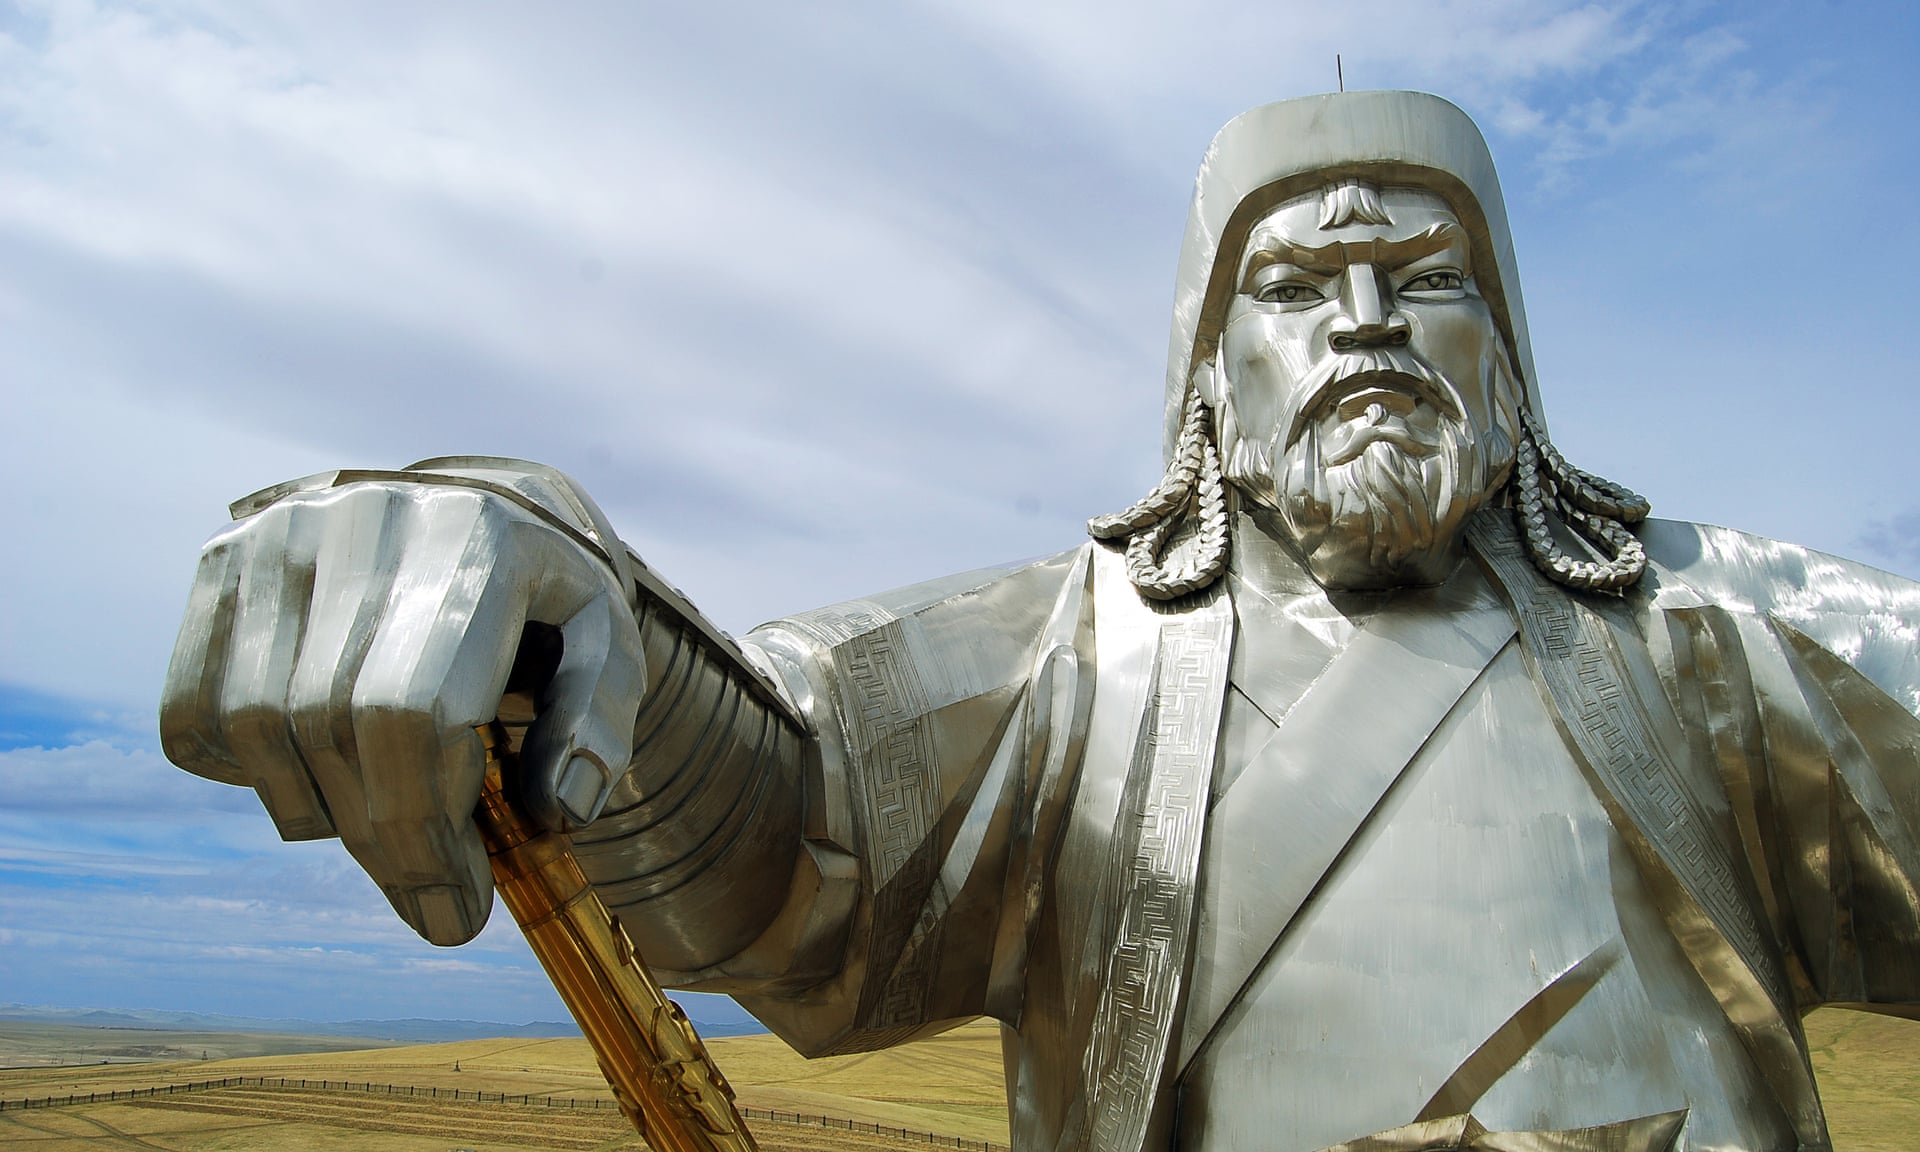 China insists Genghis Khan exhibit not use words ‘Genghis Khan’